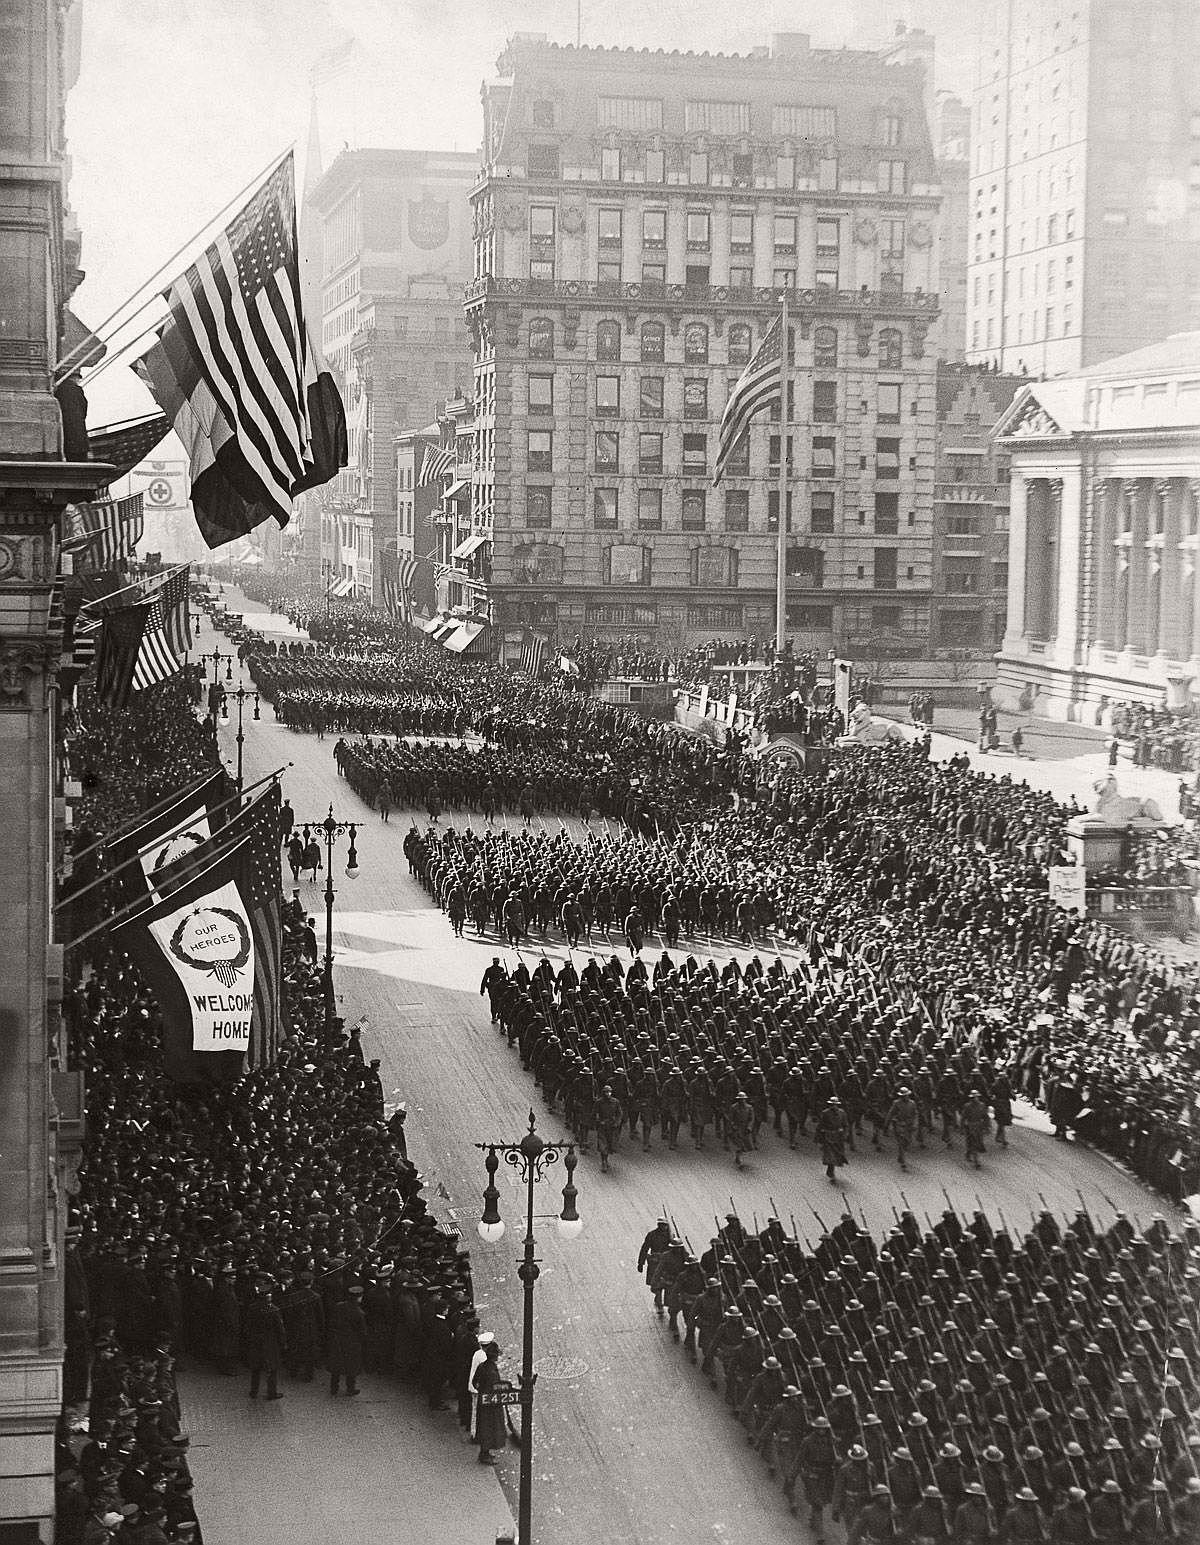 The 369th parades up Fifth Avenue upon their return to New York. Feb. 17, 1919. (FPG/Hulton Archive/Getty Images)